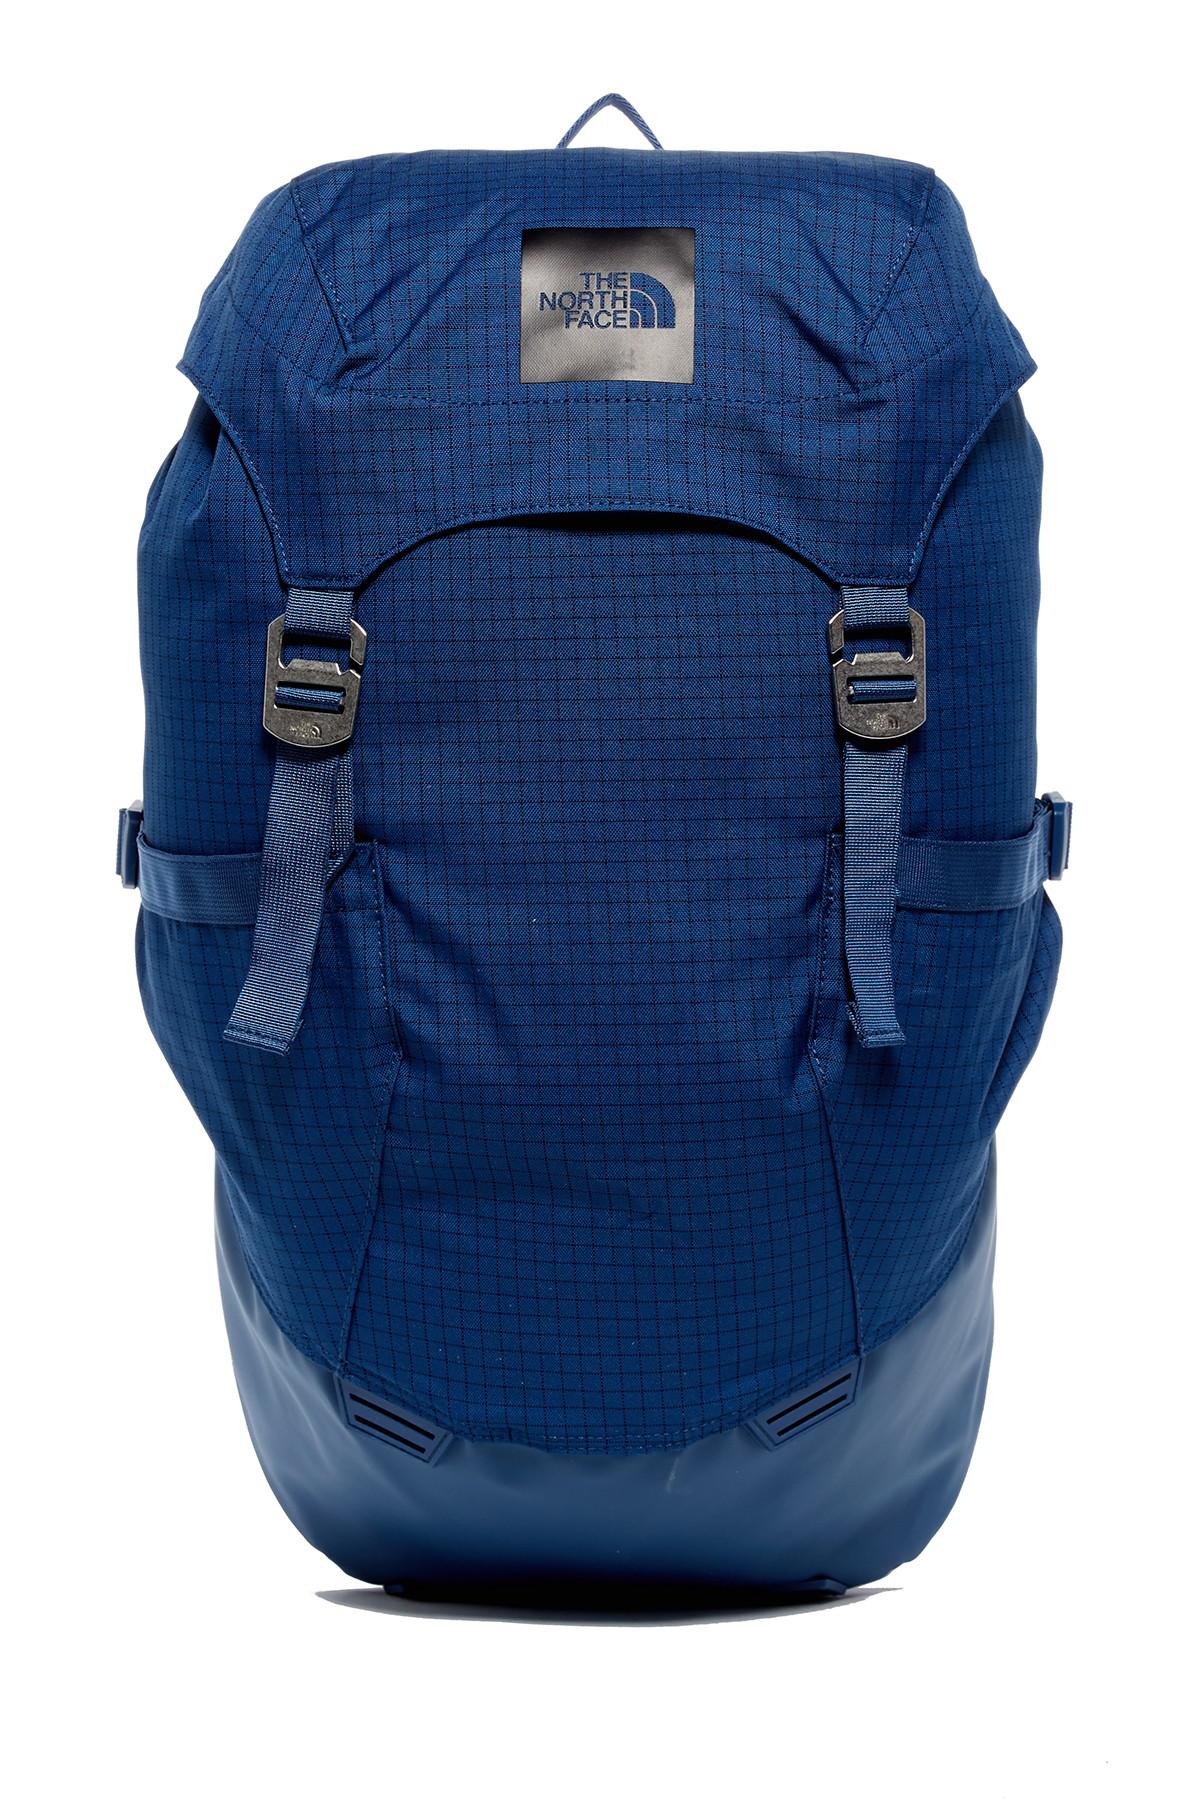 The North Face Synthetic Homestead Roadtripper Pack in Blue for Men - Lyst